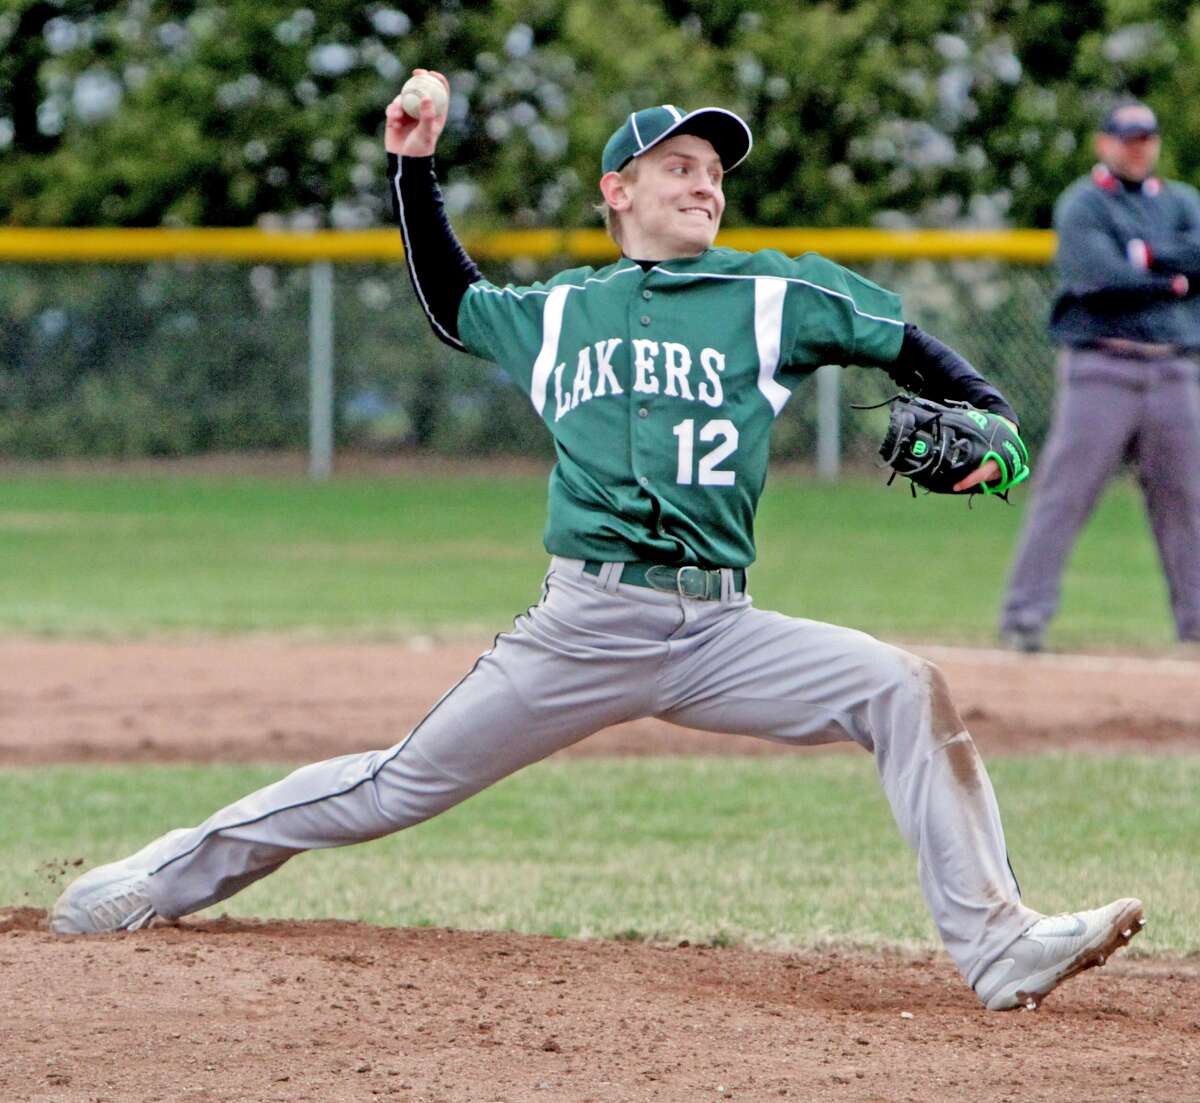   Brennan Wissner pitches for EPBP during a game with Harbor Beach, Tuesday. Under new rules, high school pitchers are limited to a maximum of 105 pitches in a game and then must have three days rest. 